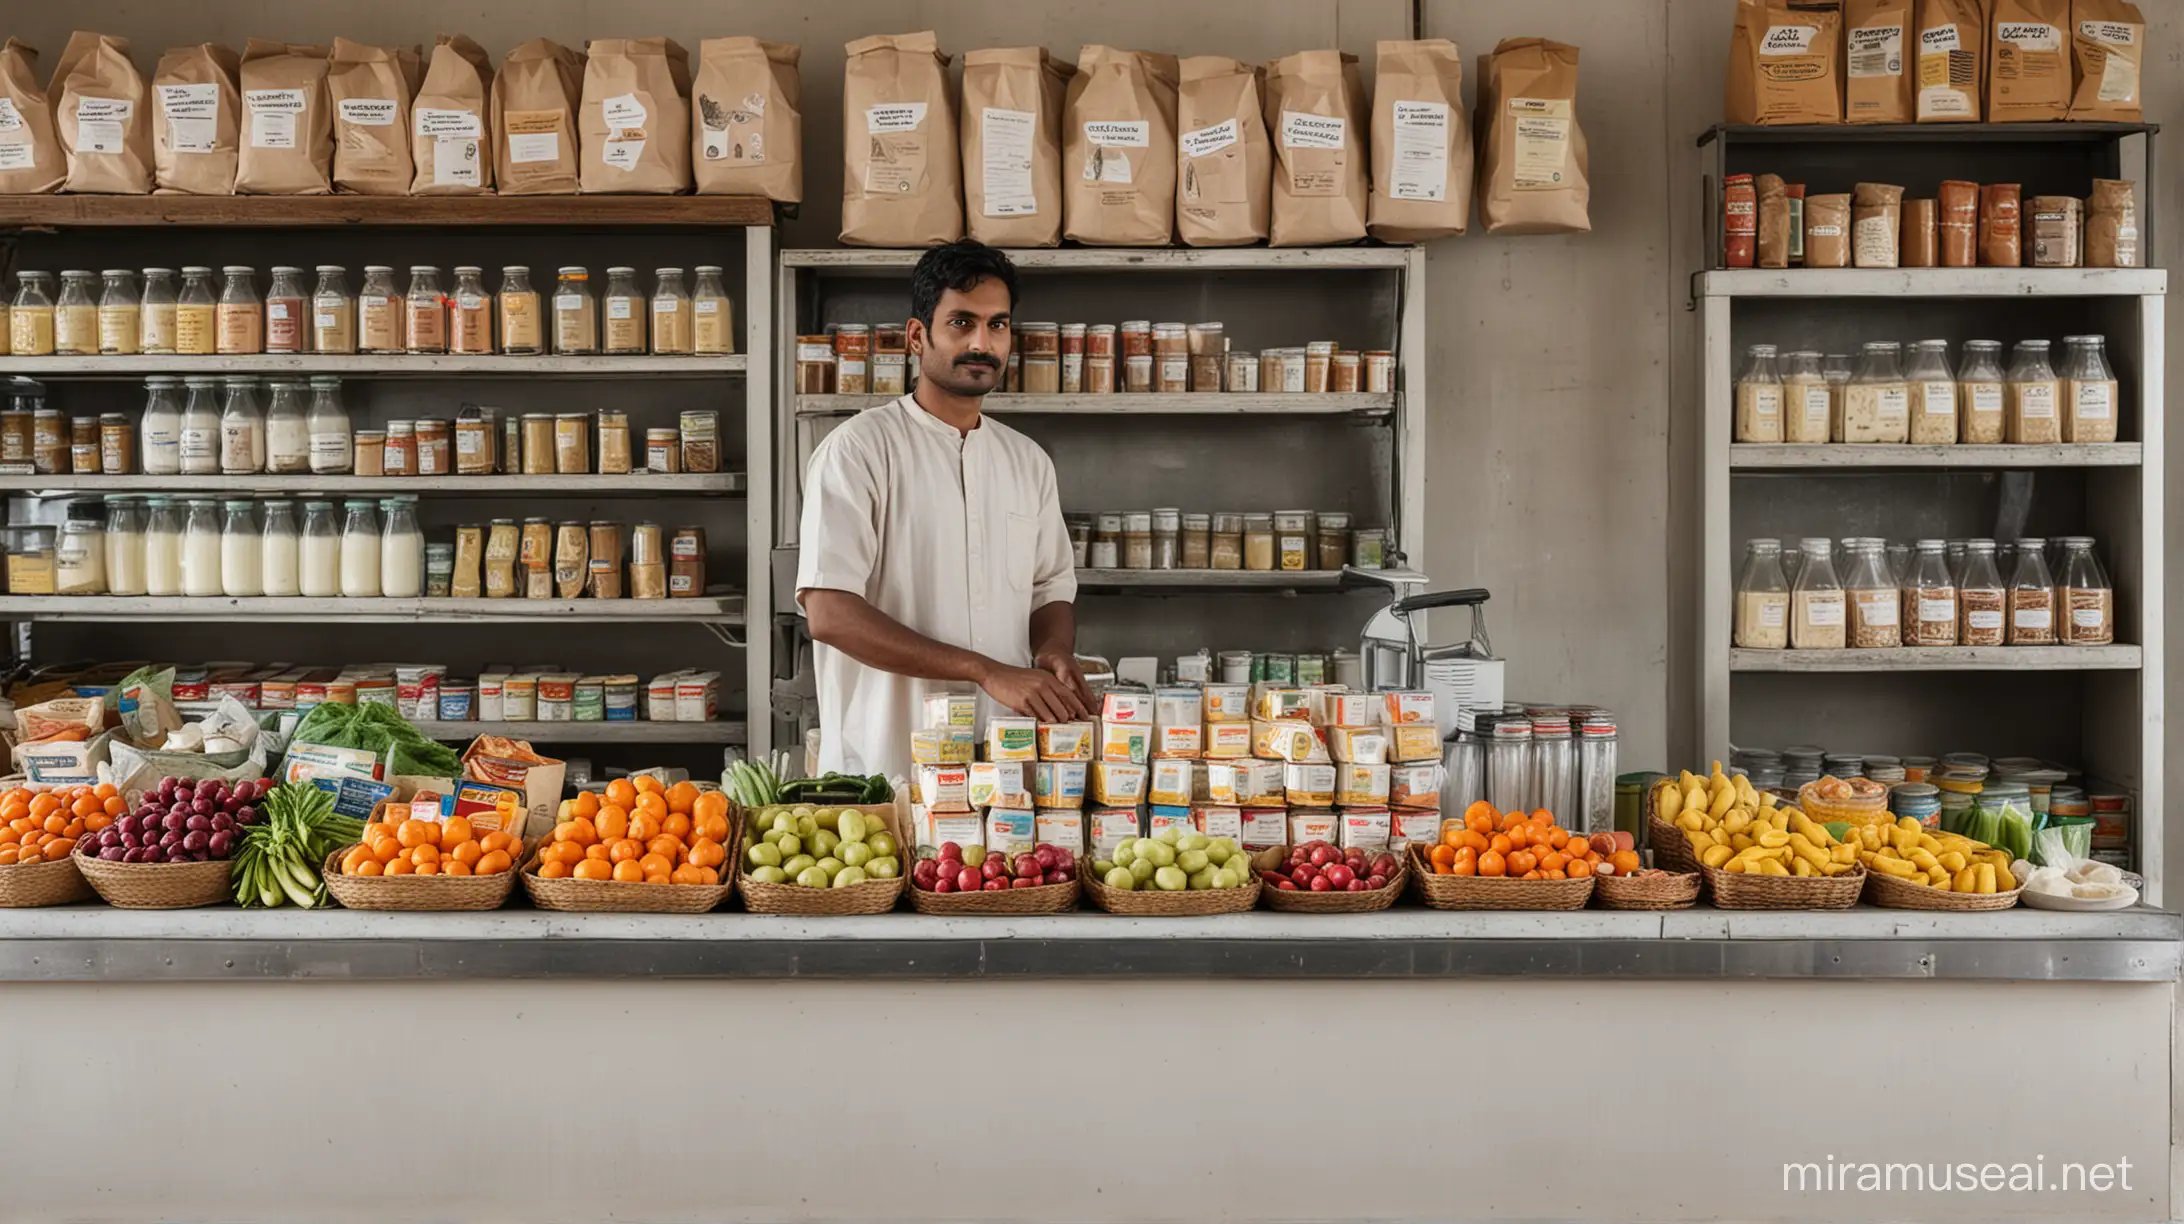 Modern Indian Urban Milk Store with Fresh Produce and Friendly Shopkeeper